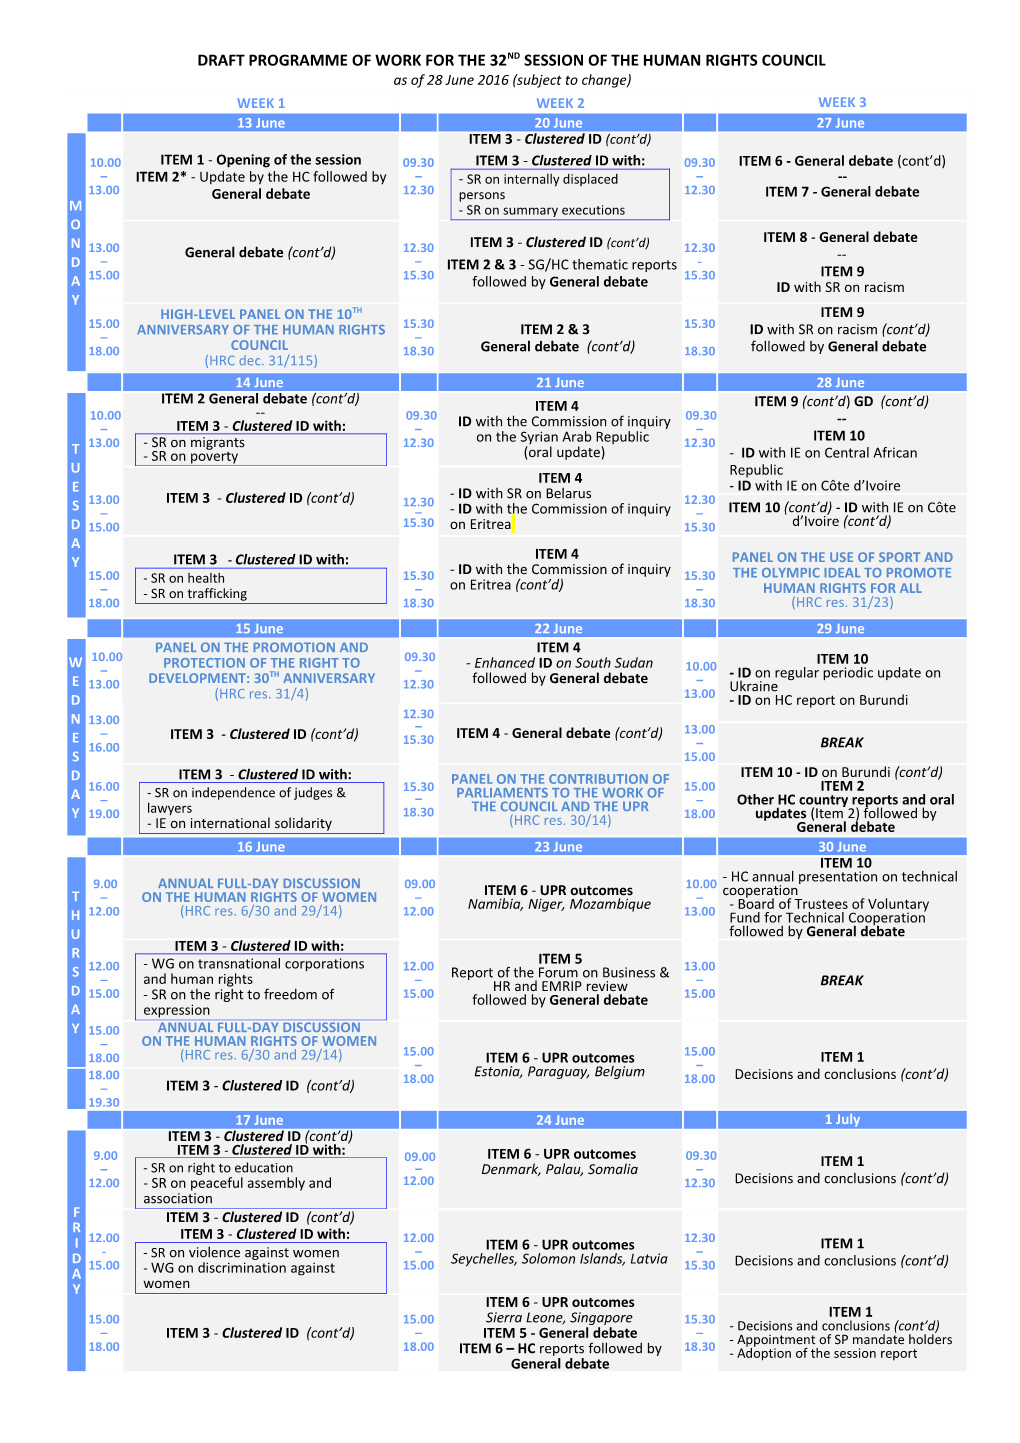 Programme of Work for the 32Nd Session of the Human Rights Council in English